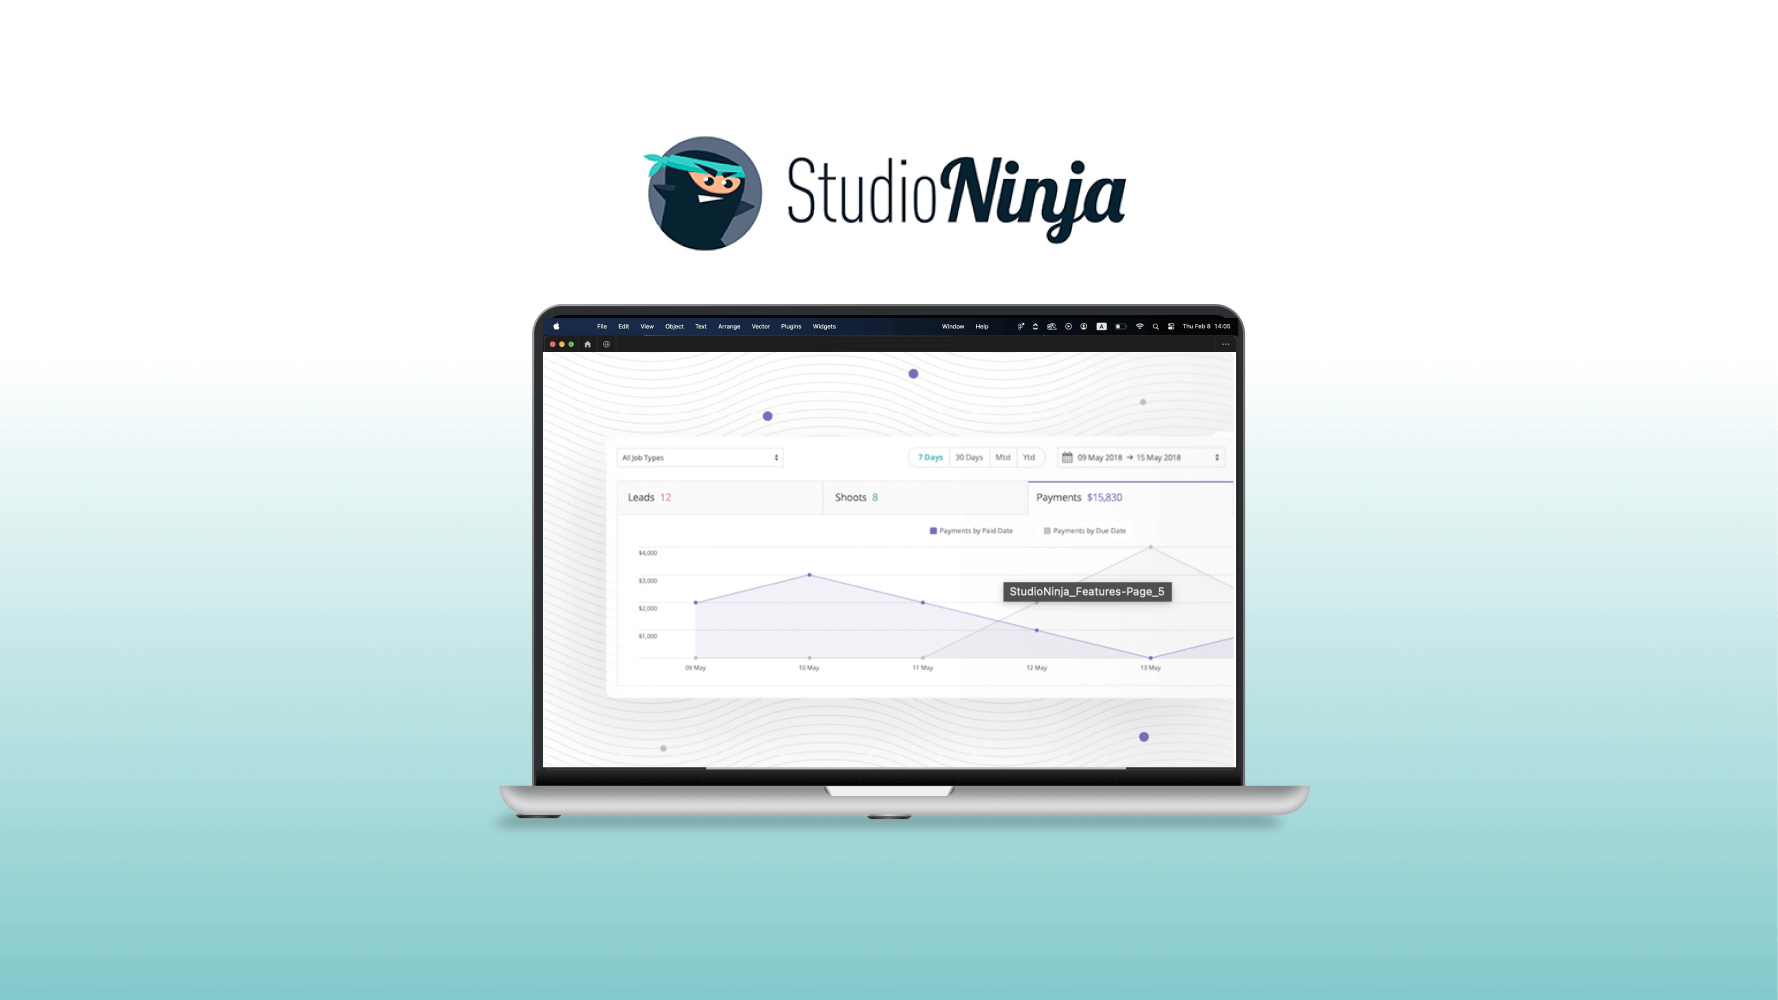 Studio Ninja photography business management software is the perfect V-Day gift